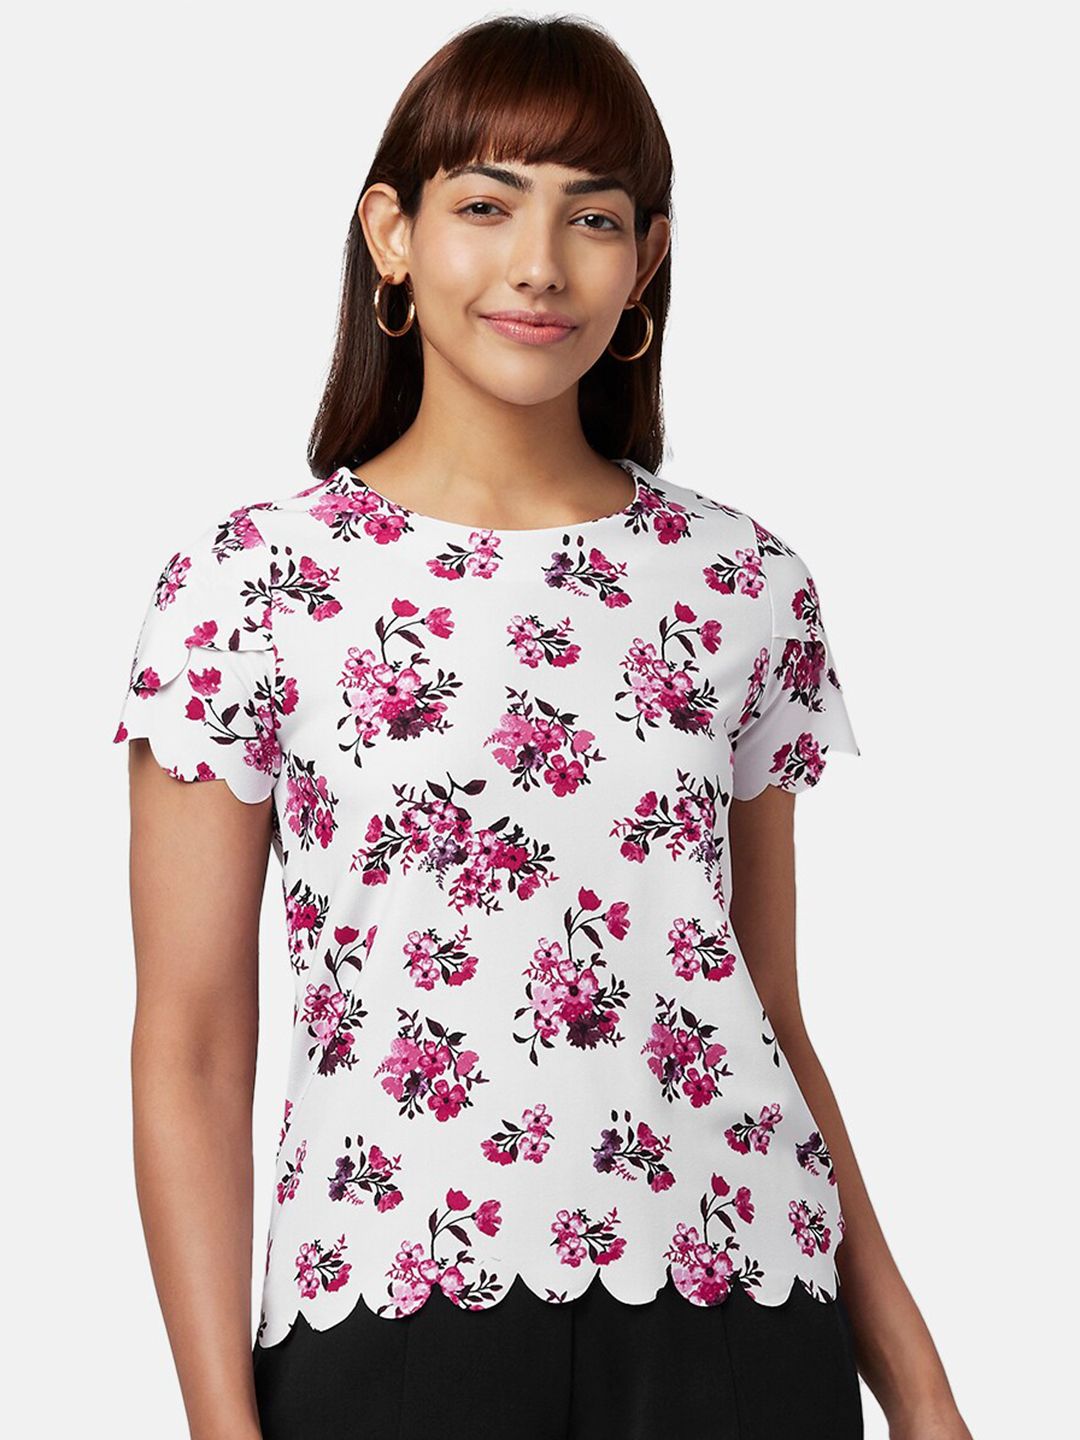 Honey by Pantaloons Off White & Pink Floral Print Top Price in India